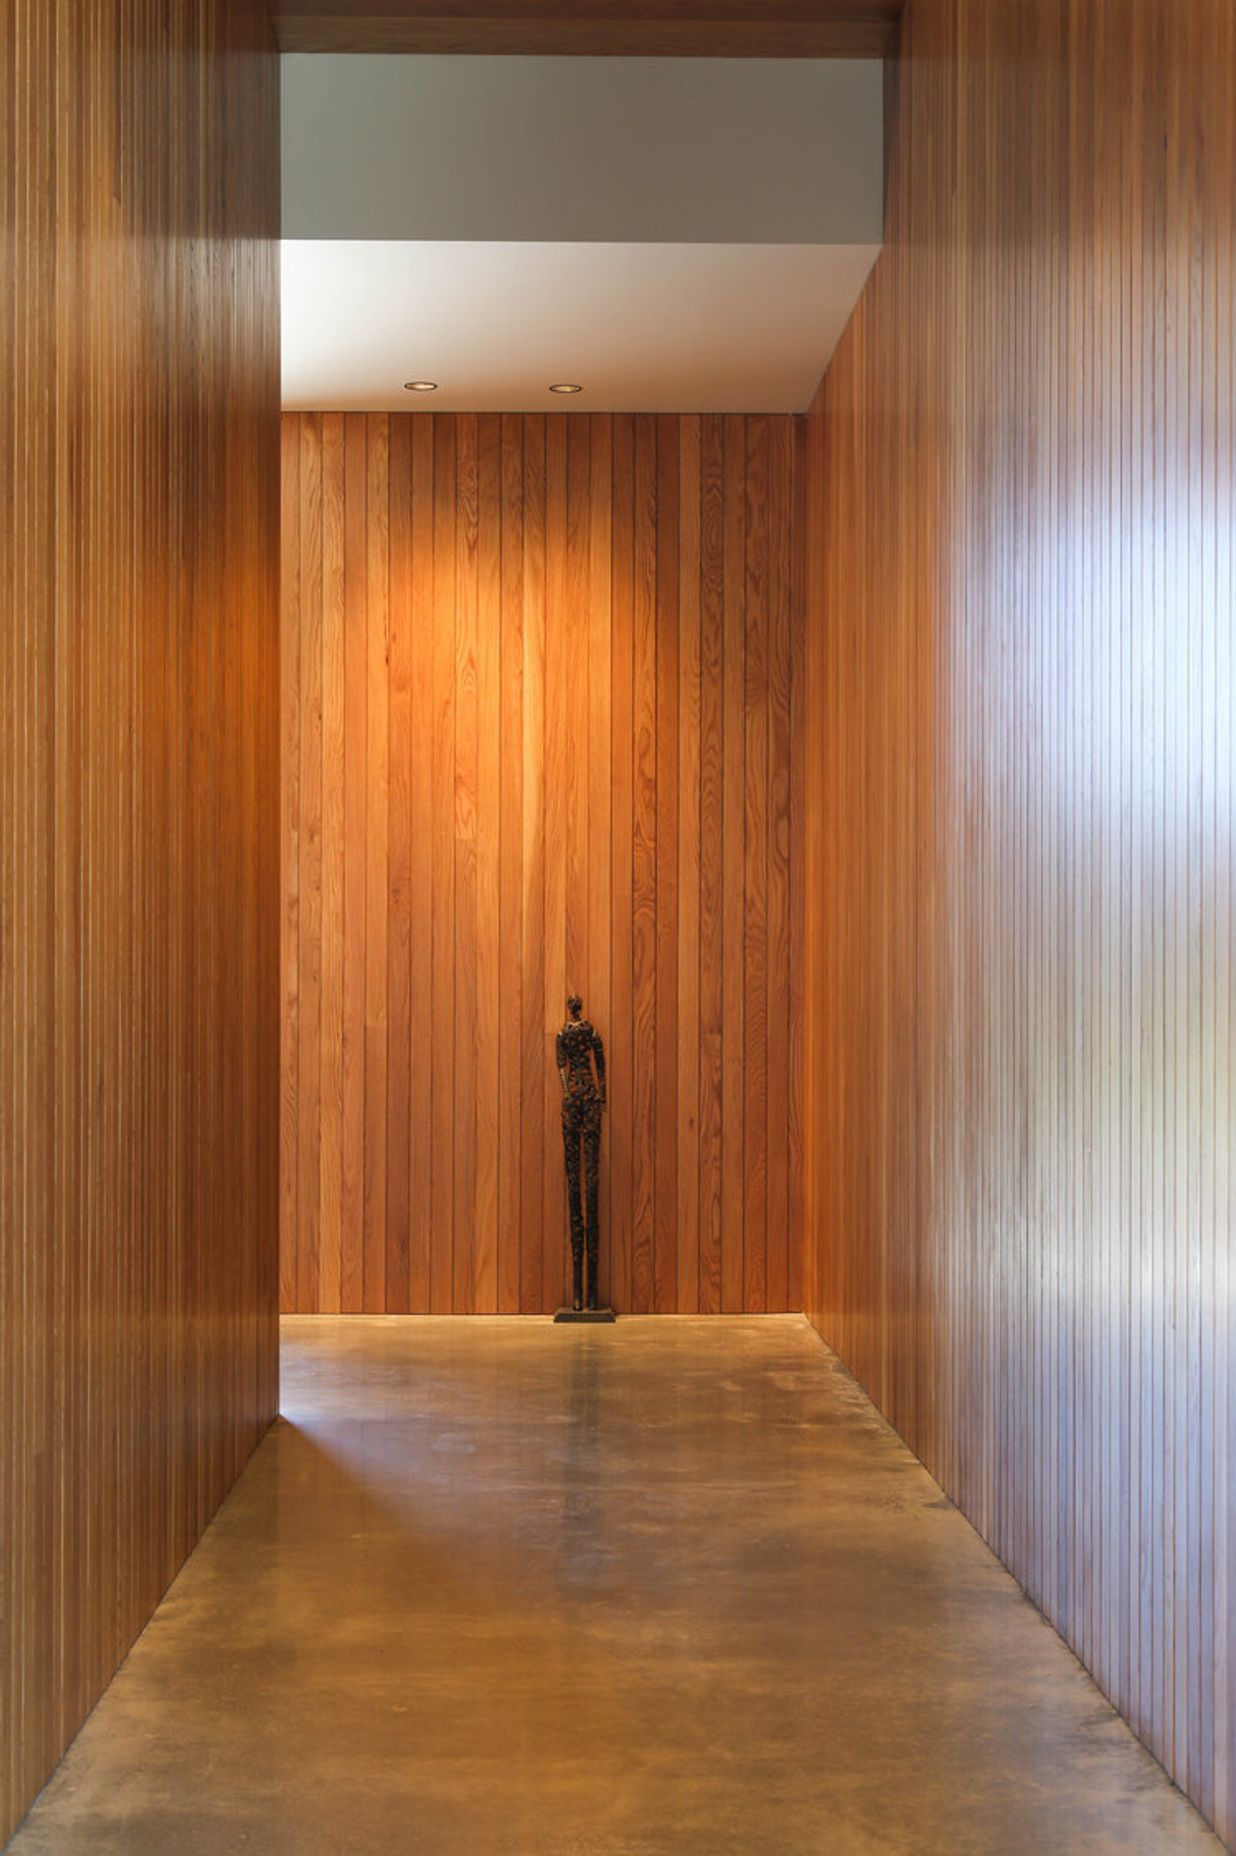 A timber -lined corridor also provides space for artworks.